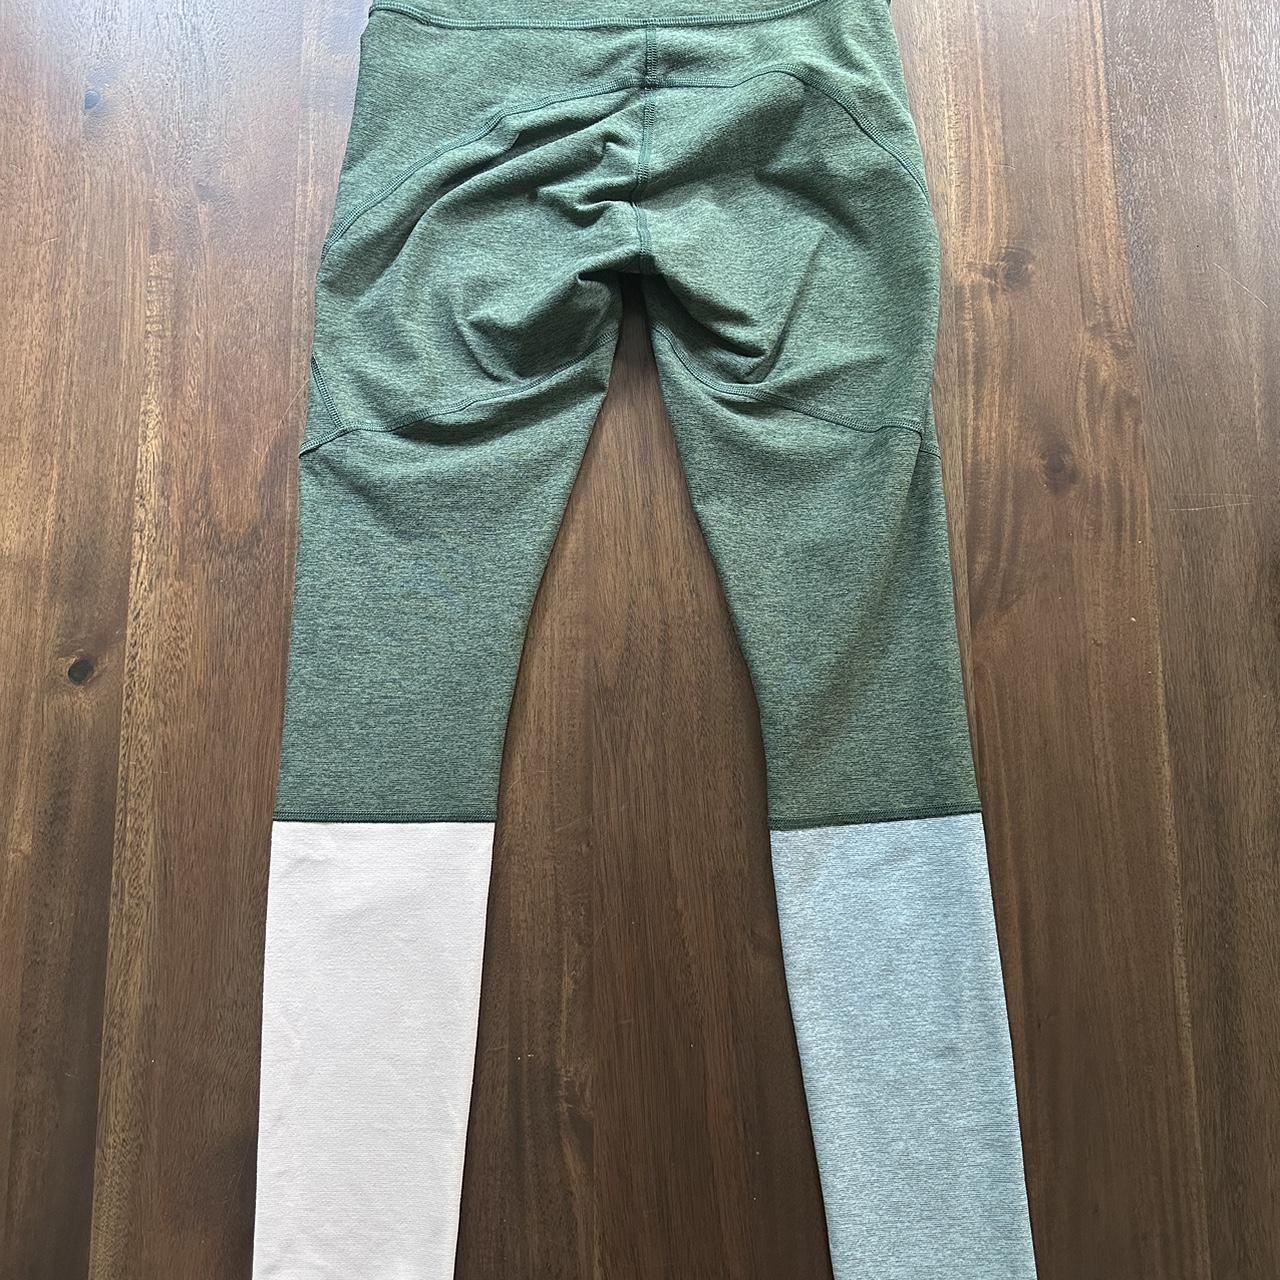 Outdoor Voices 7/8 Warmup Leggings in Charcoal - Depop